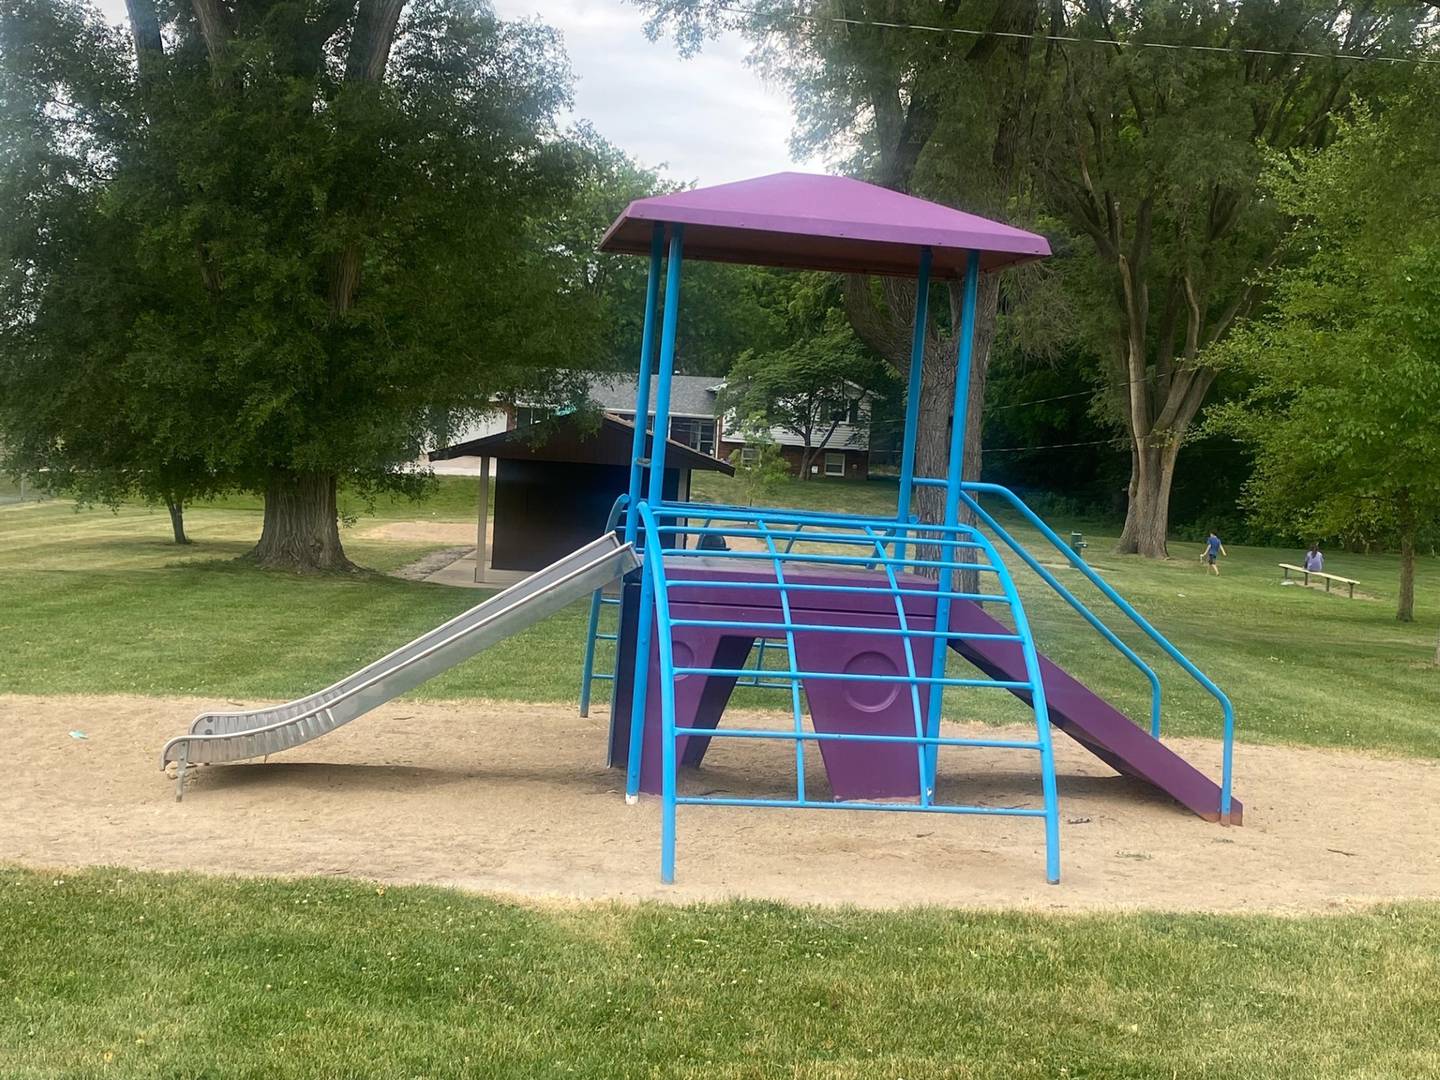 The playground equipment at Sunset Park should be replaced as early as fall 2023.